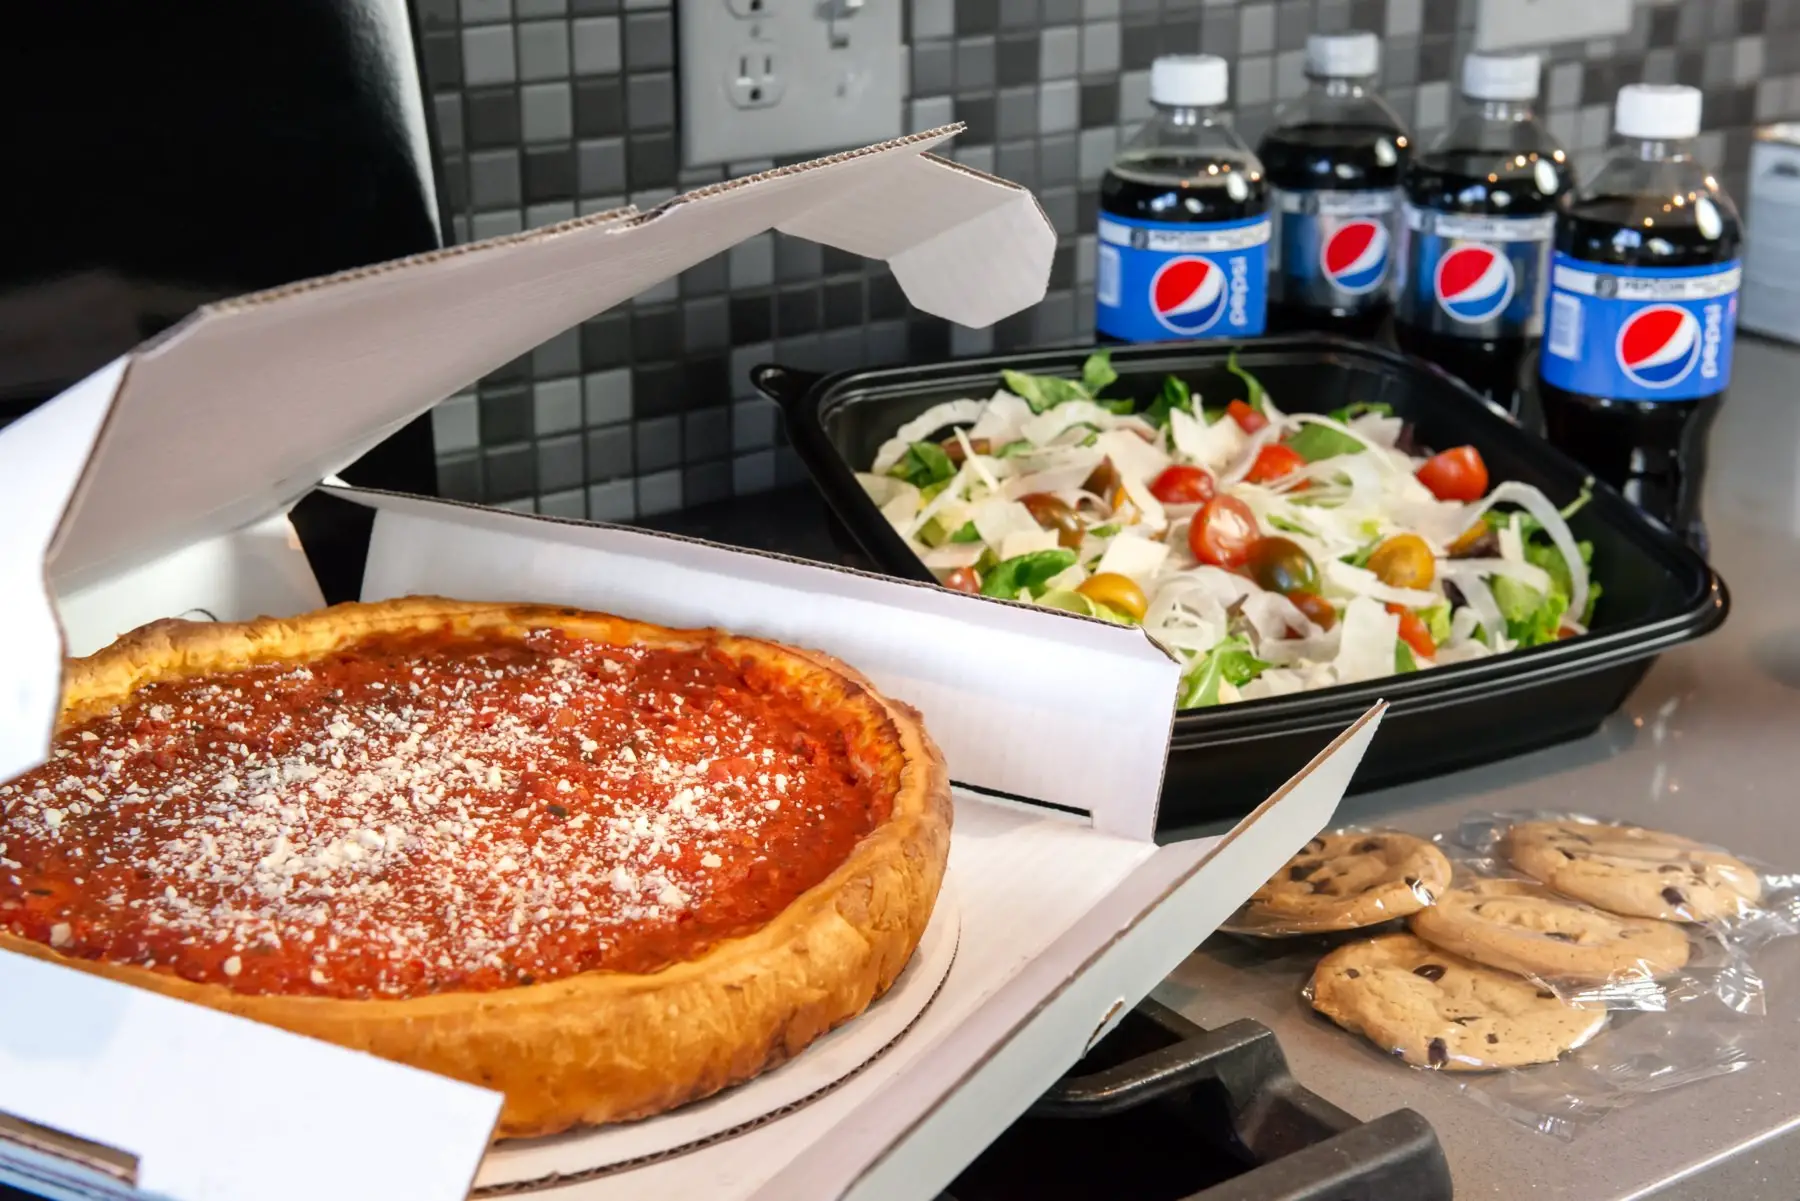 Giordano's Pizza National Pizza Party Day Ultimate Meal Deal: Large Thin Crust Pizza, 4 Cookies, Salad and Pepsi Package